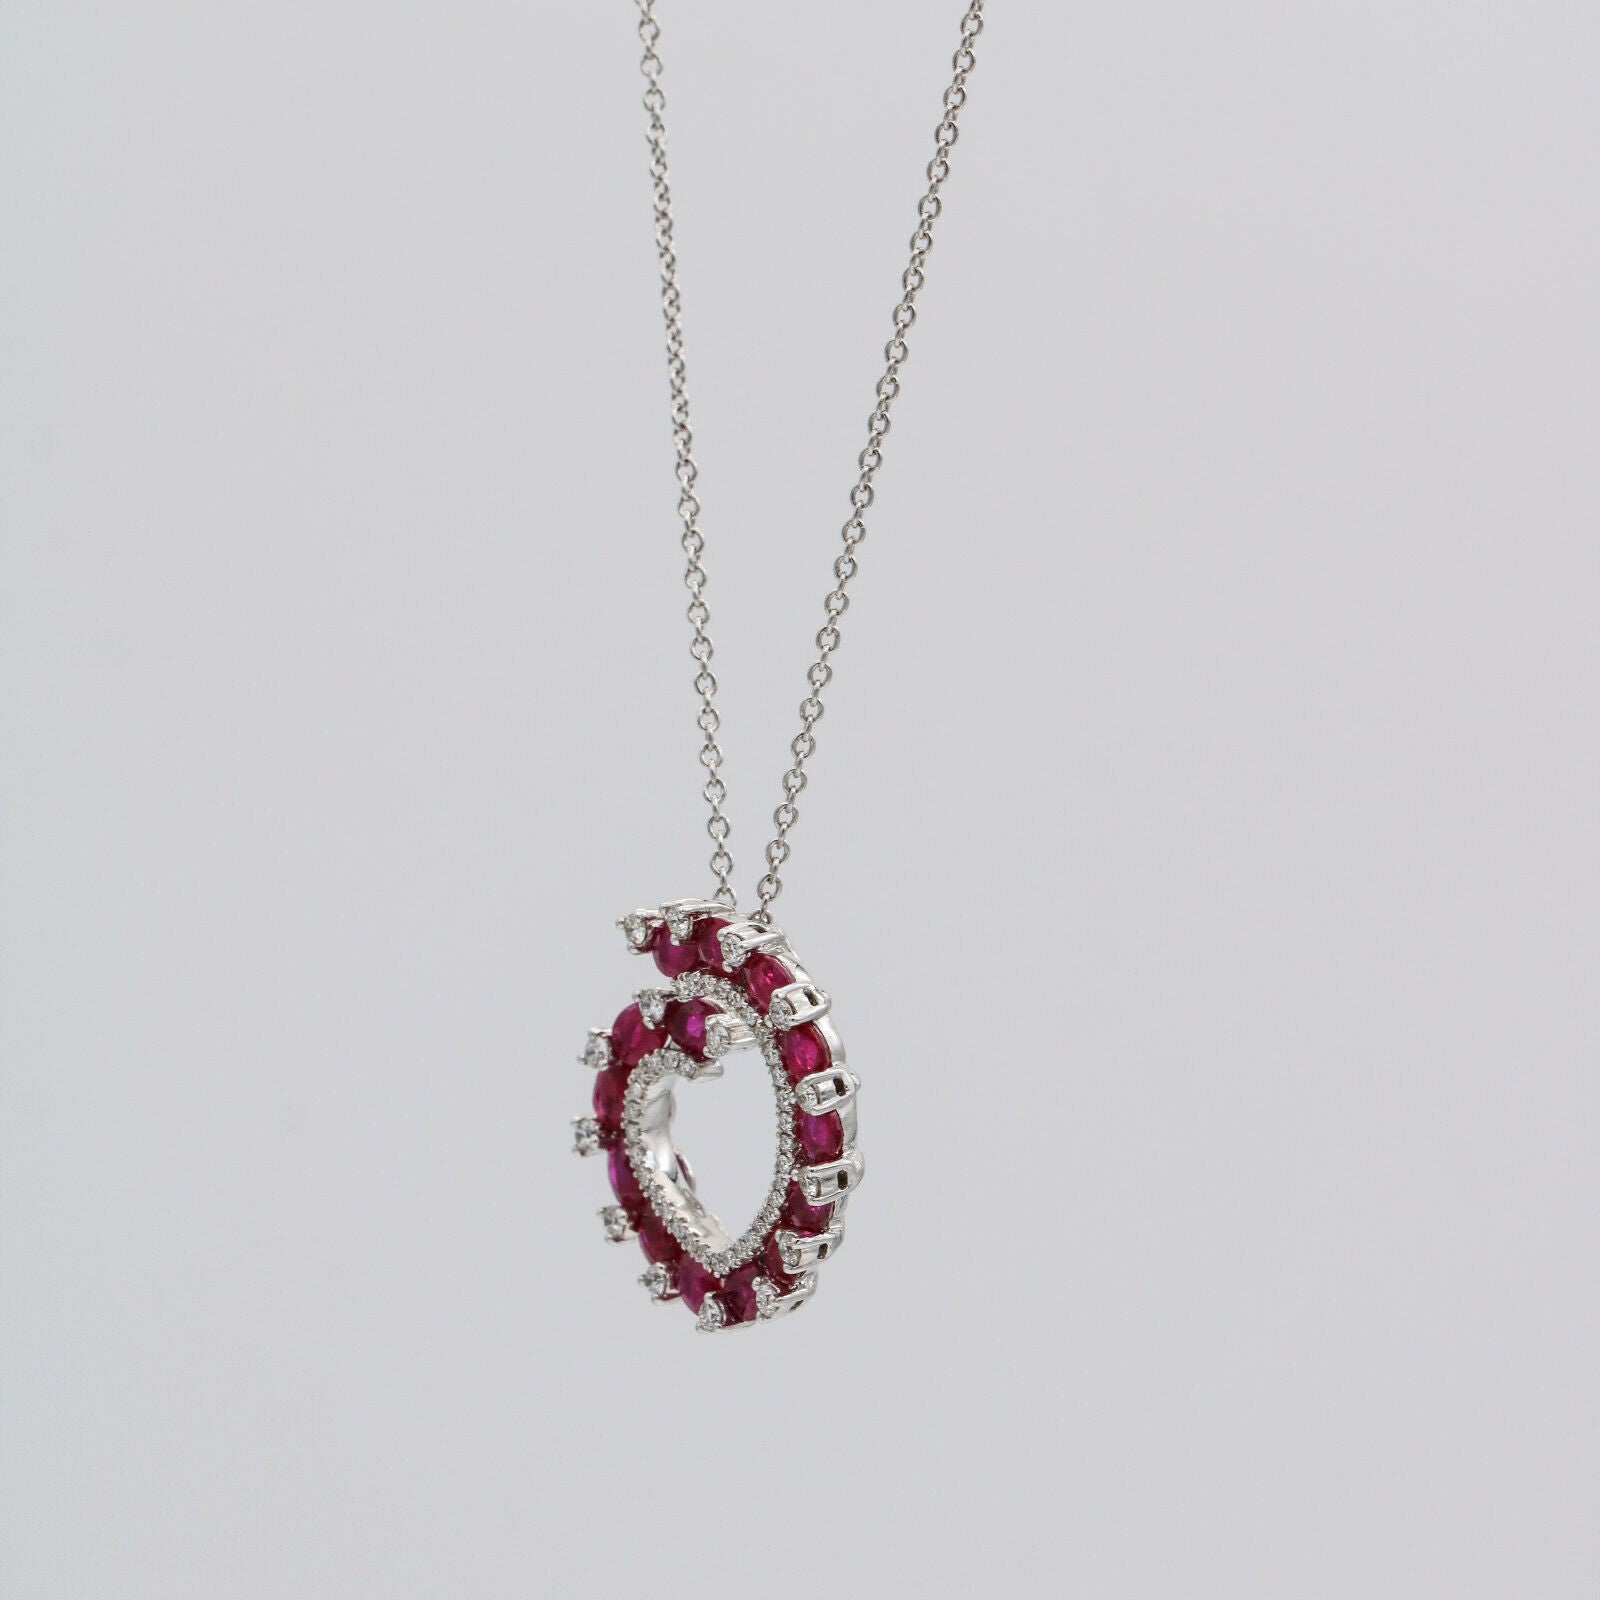 3.87 ct Women's Ruby and Diamond Open Heart Pendant Necklace in 18k White Gold